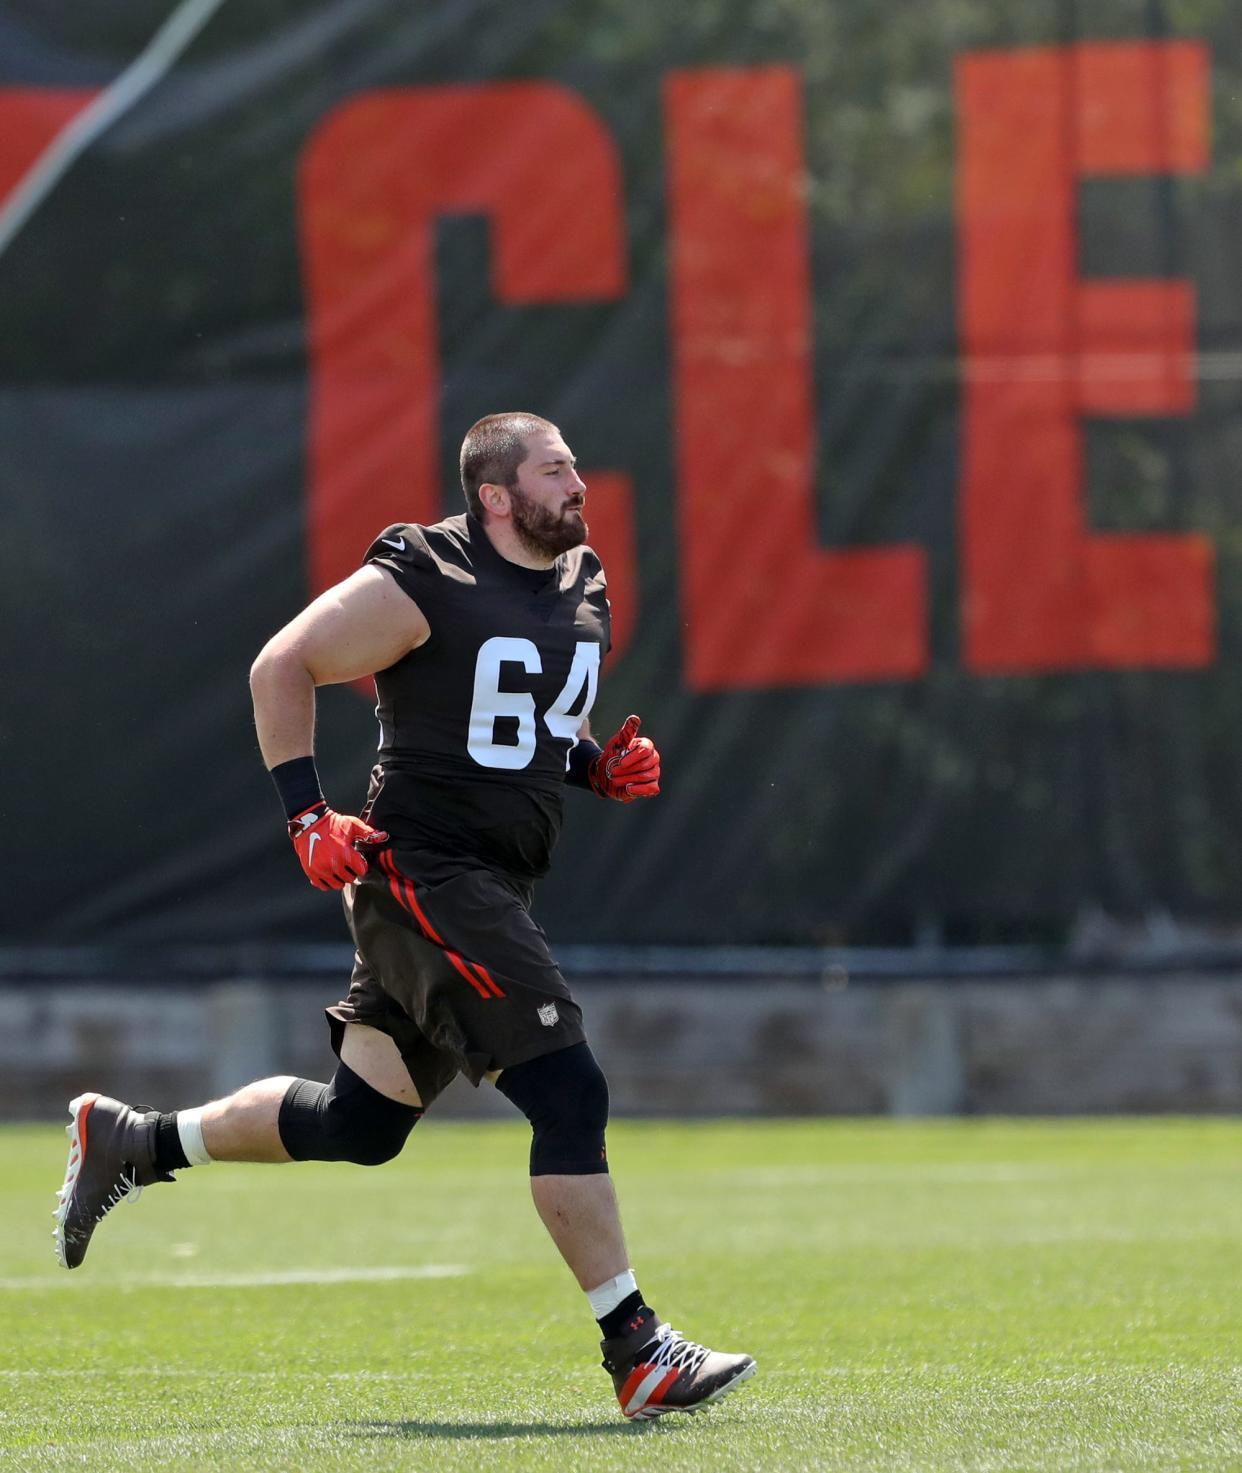 Cleveland Browns center JC Tretter (64) warms up during an NFL football practice at the team's training facility, Tuesday, June 15, 2021, in Berea, Ohio. [Jeff Lange / Akron Beacon Journal]